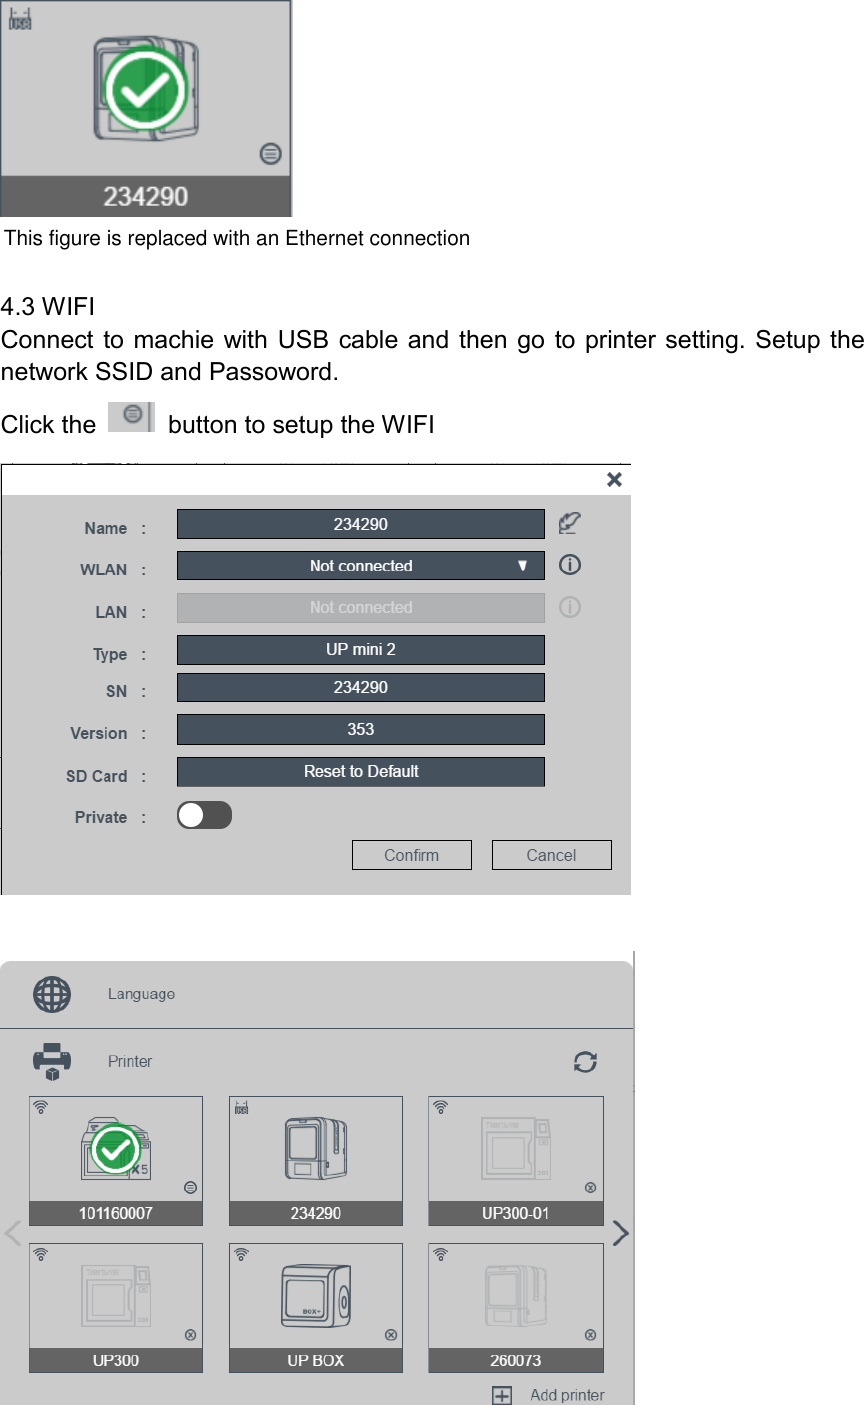    4.3 WIFI Connect to machie with USB cable and then go to printer setting. Setup the network SSID and Passoword. Click the    button to setup the WIFI    This figure is replaced with an Ethernet connection